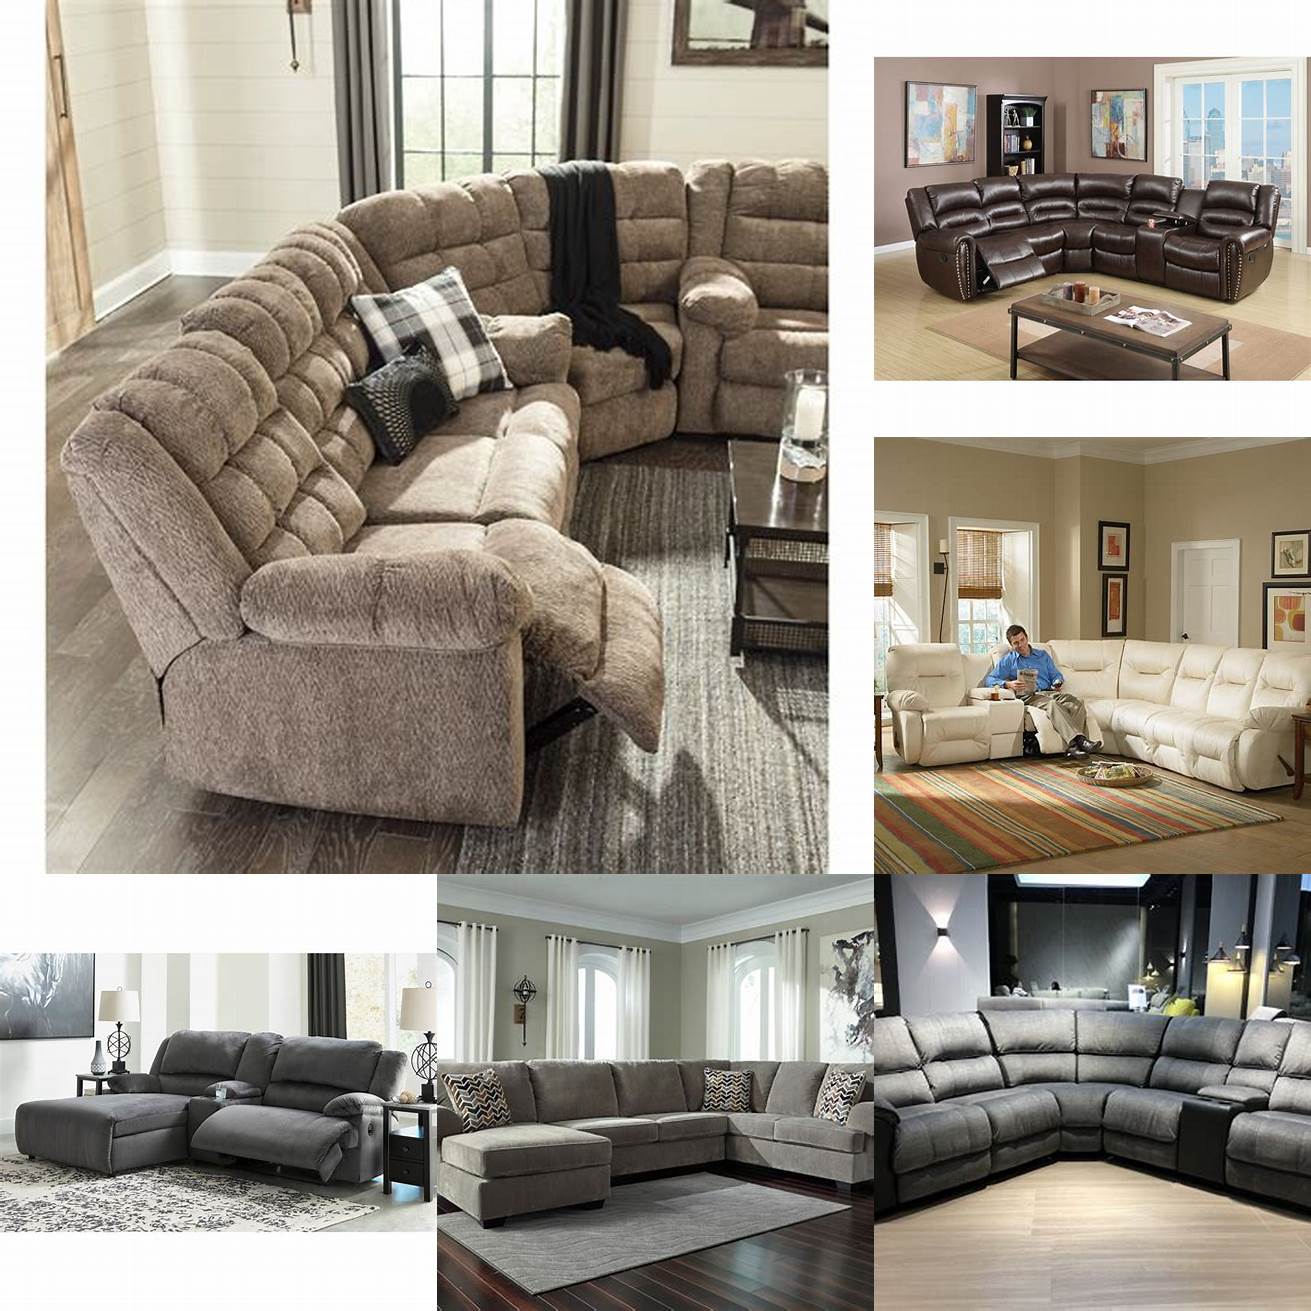 A 3 piece sectional sofa with a recliner offers ultimate comfort and relaxation